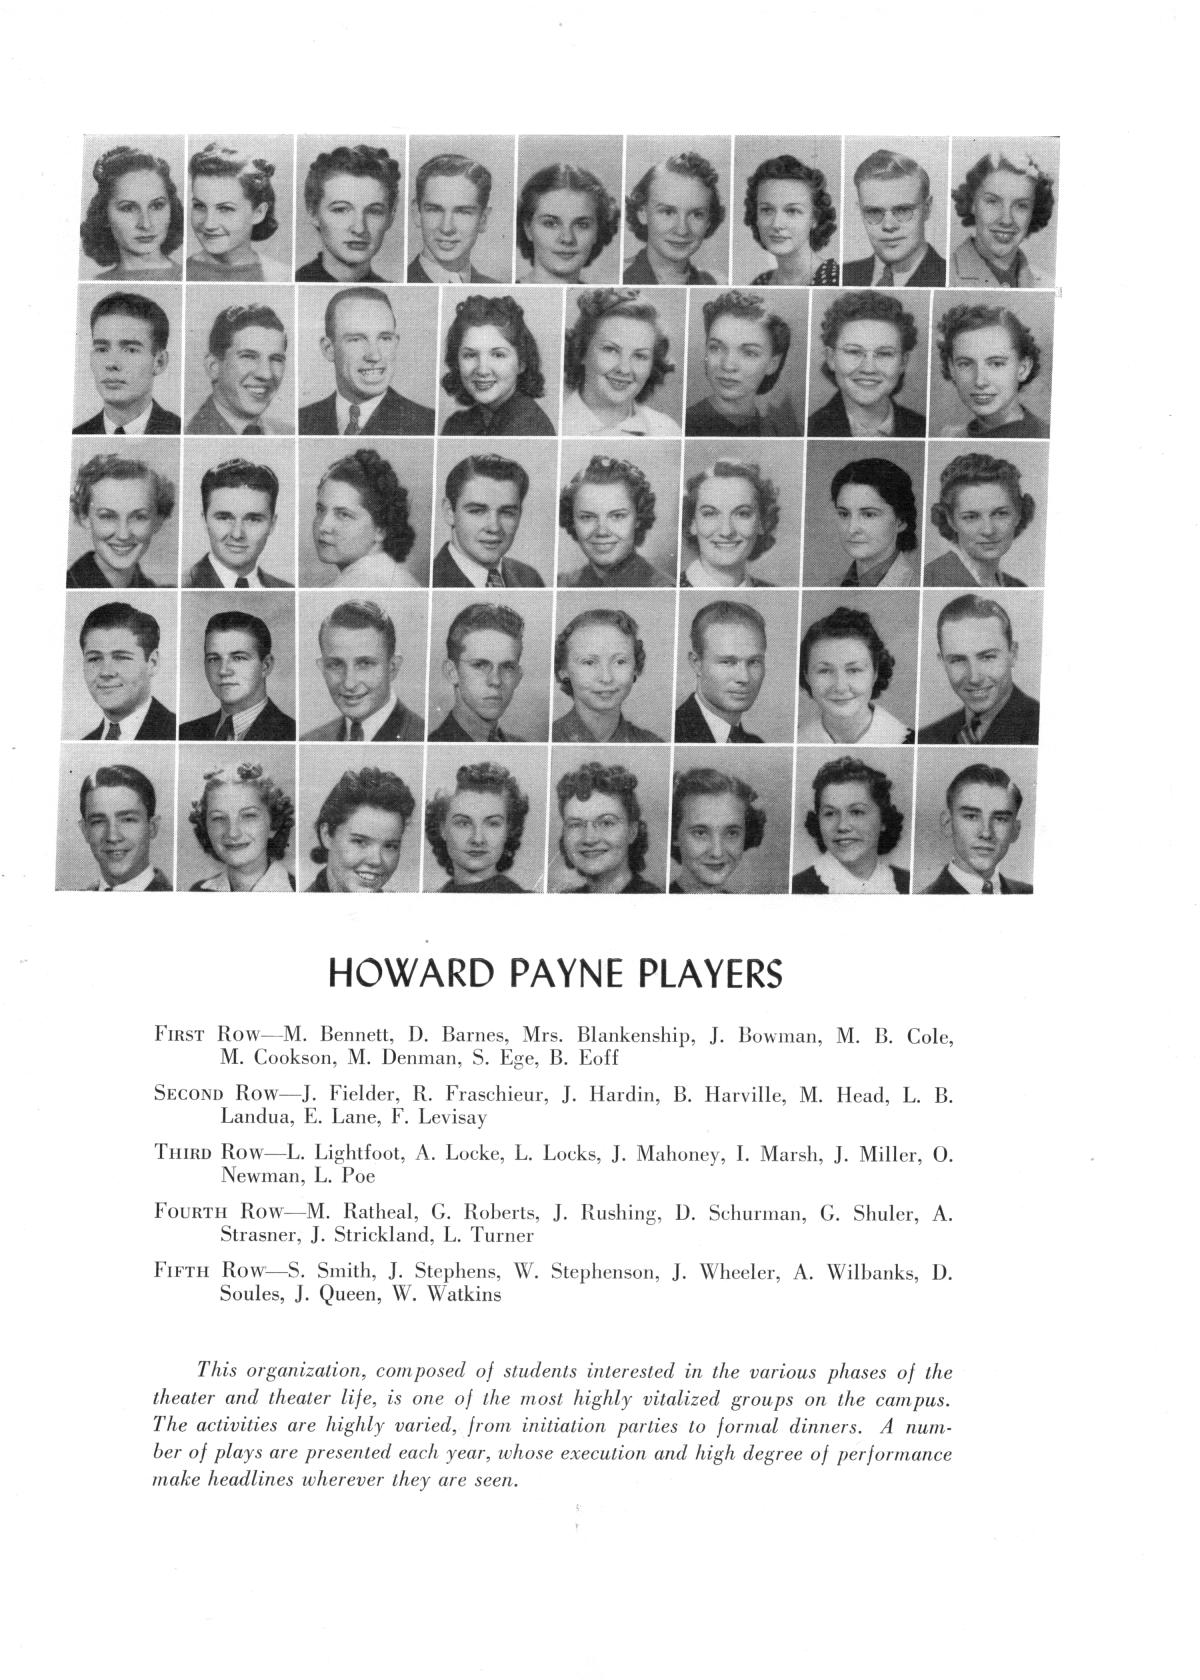 The Lasso, Yearbook of Howard Payne College, 1940
                                                
                                                    50
                                                